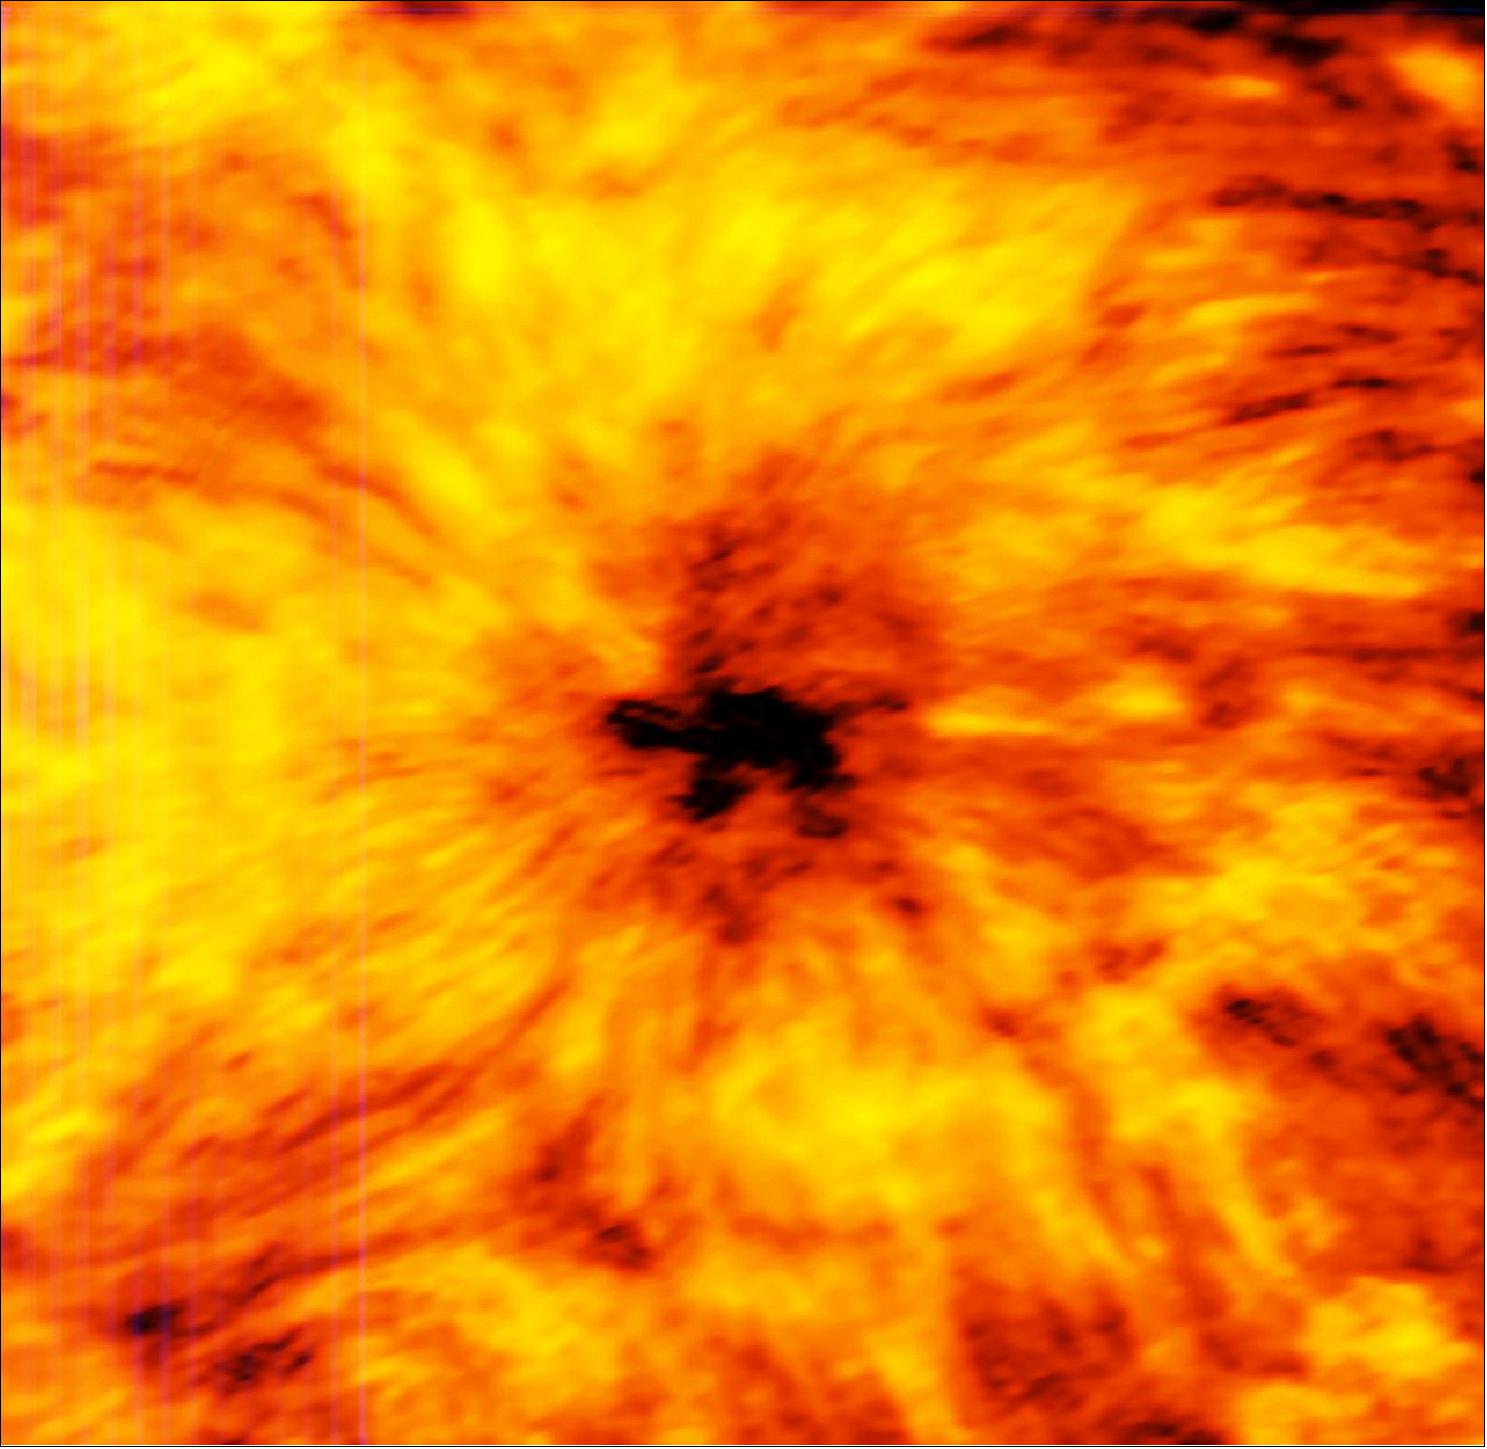 Figure 41: ALMA observed a giant sunspot with the band 6 receiver at the wavelength of 1.25 mm, acquired on Dec. 18, 2015. The sunspot is nearly twice the diameter of the Earth (image credit: ALMA, ESO, NAOJ, NRAO)